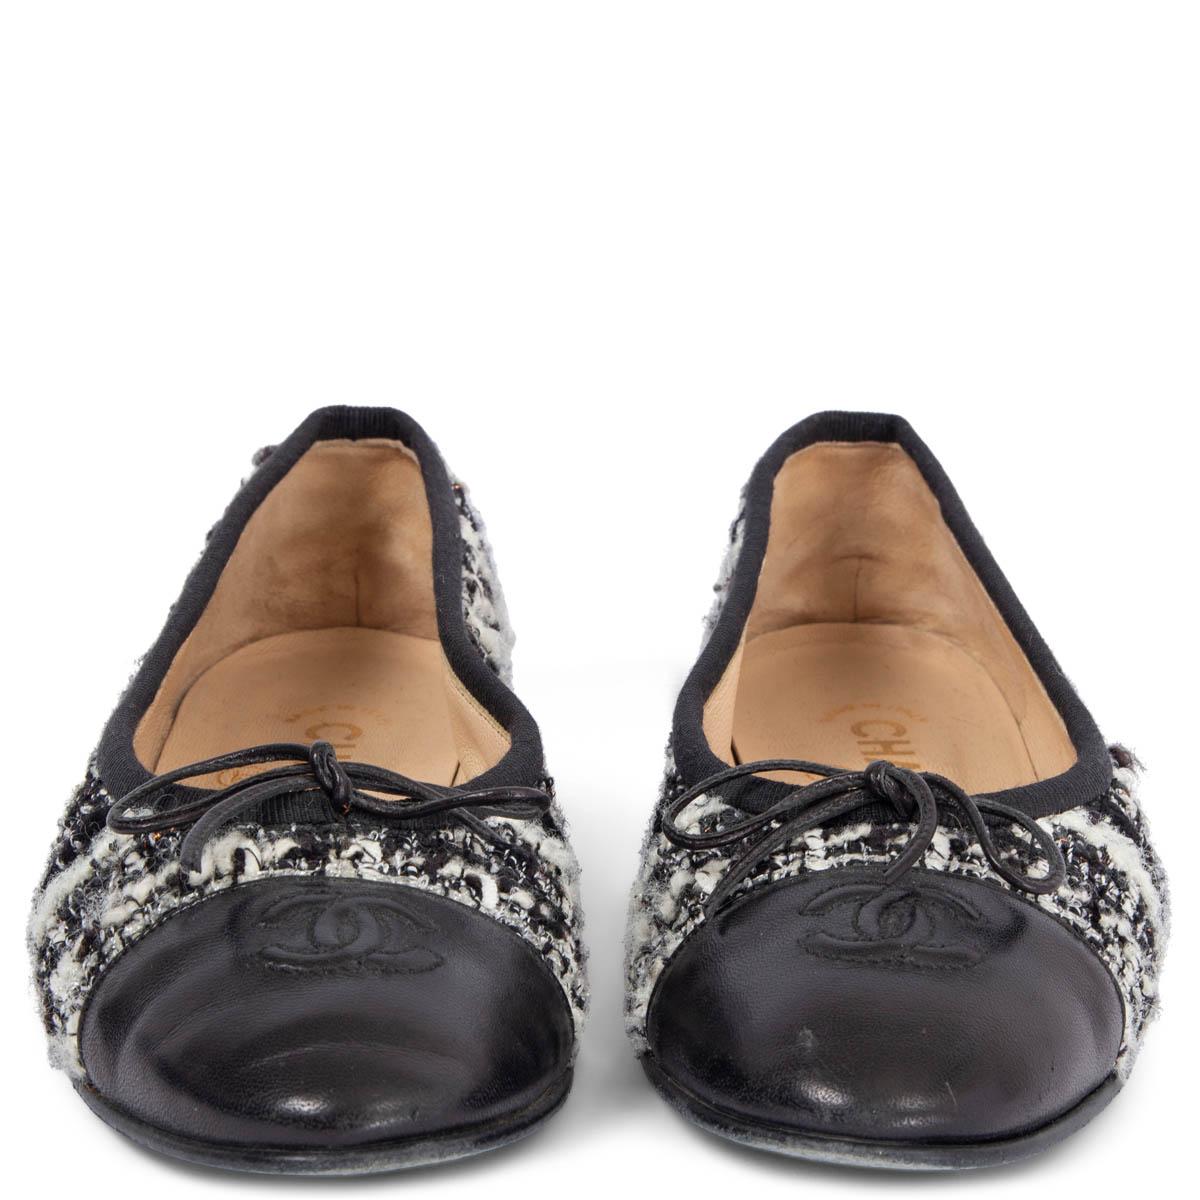 100% authentic Chanel ballerinas in black, white and light grey Bouclé tweed fabric with black smooth calf leather CC stitched tip. Have been worn and are in excellent condition. Come with dust bag. 

Measurements
Imprinted Size	36
Shoe